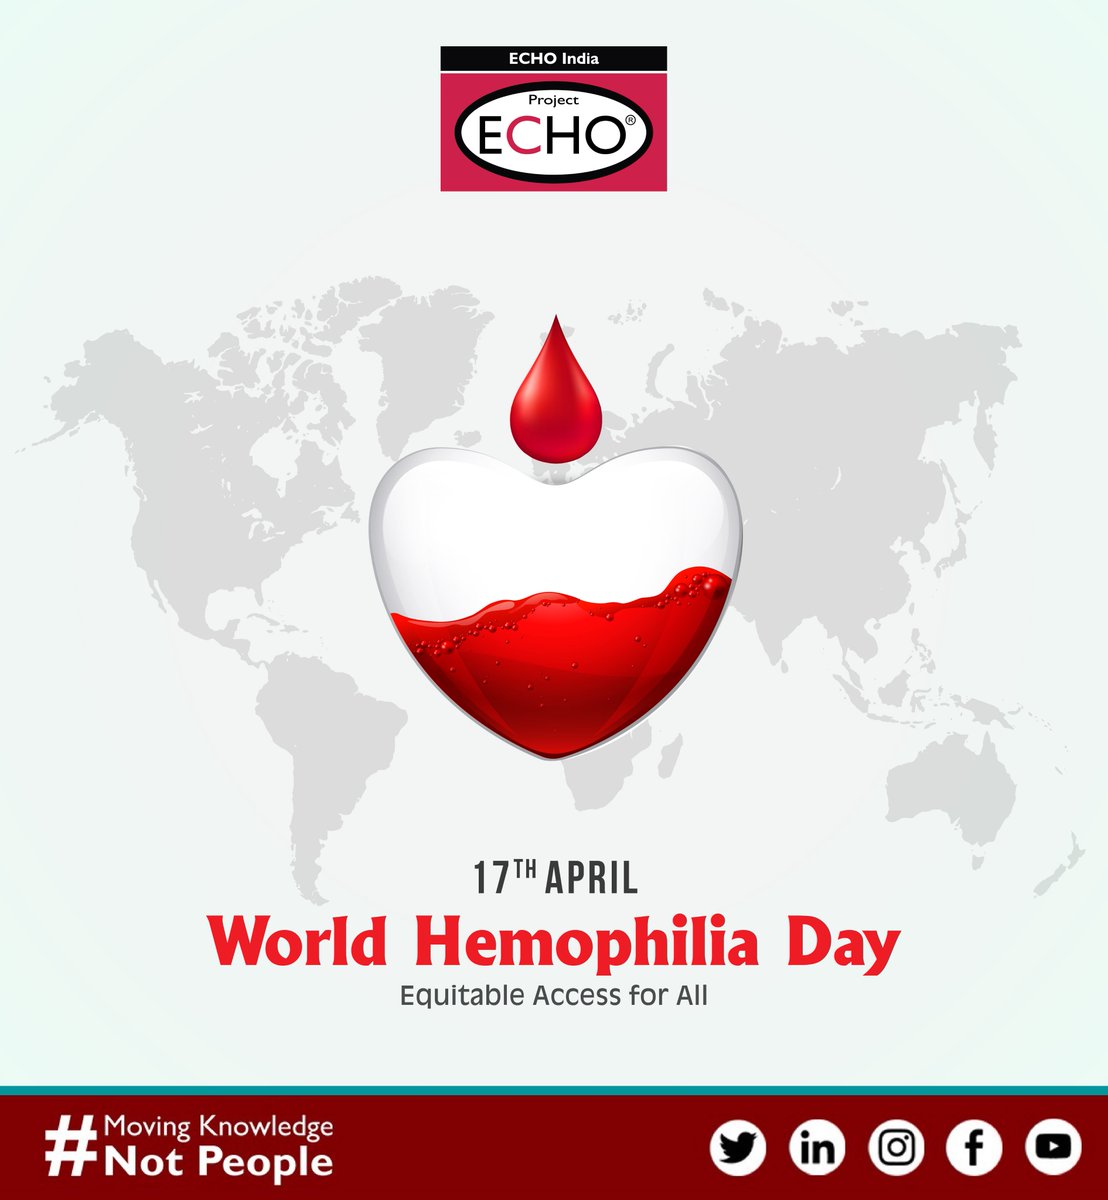 #WorldHemophiliaDay reminds us to raise awareness, drive action, and support initiatives oriented toward equitable and accessible treatment for those affected. Over the years, #ECHOIndia has supported @pho_india in running Hemophilia-focused capacity-building programs.